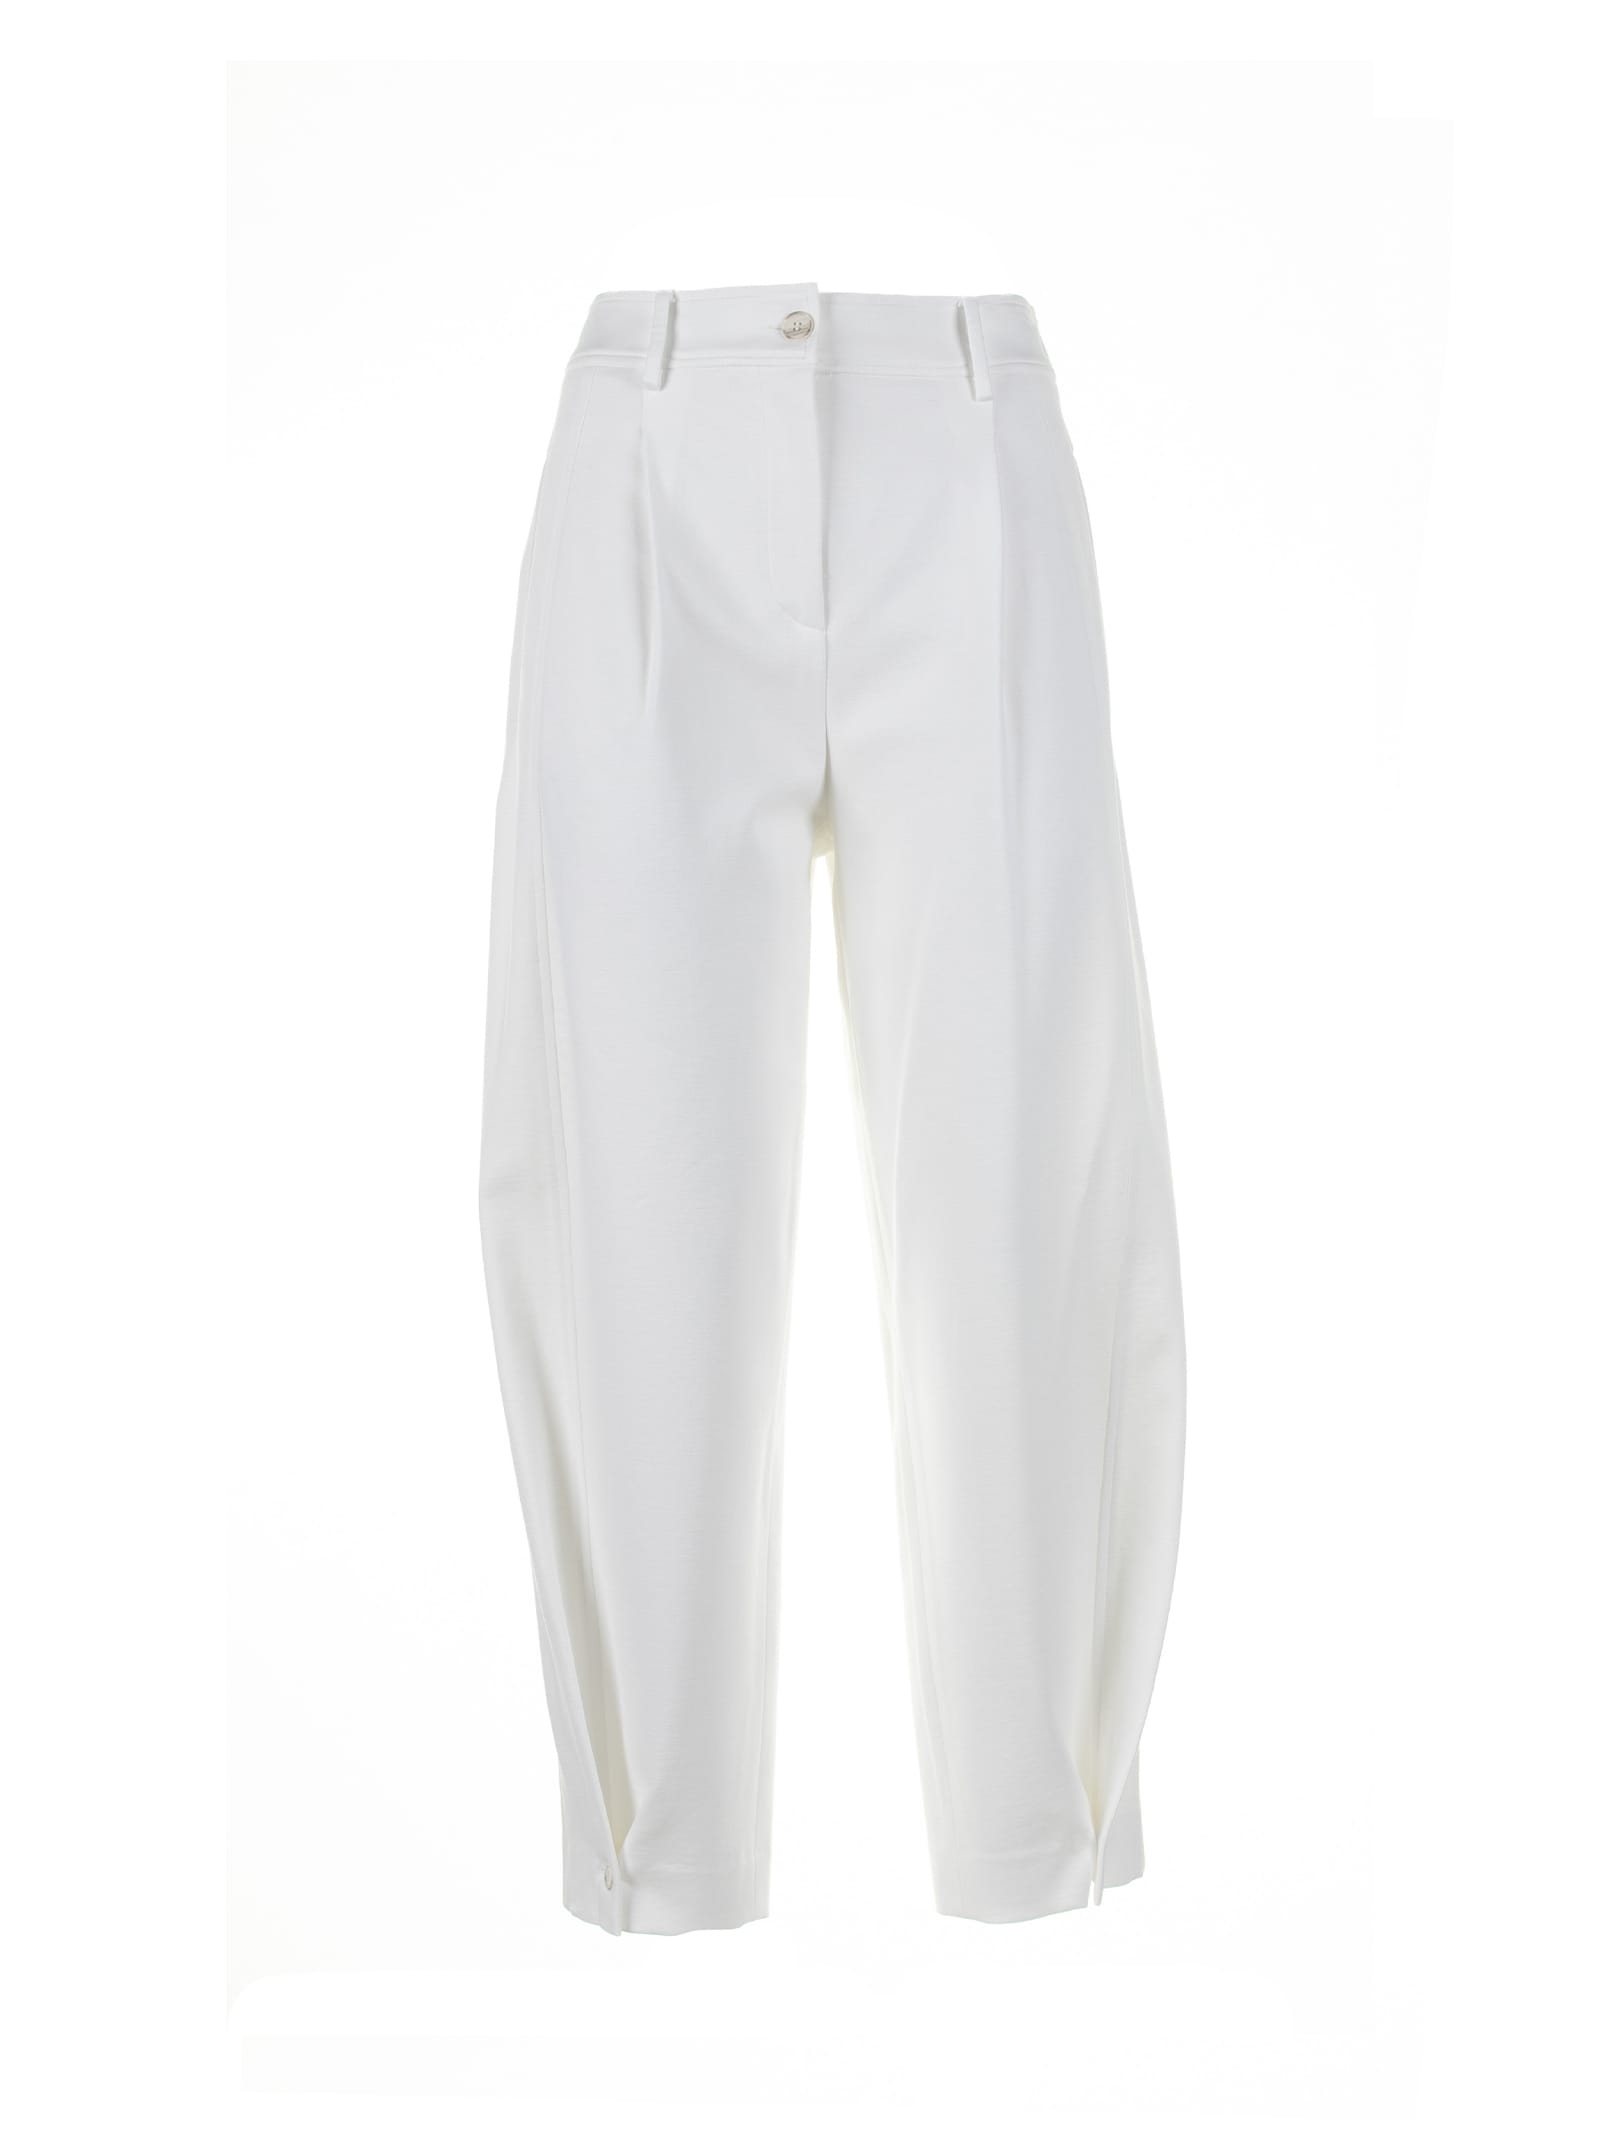 White Trousers With Buttons At The Ankle